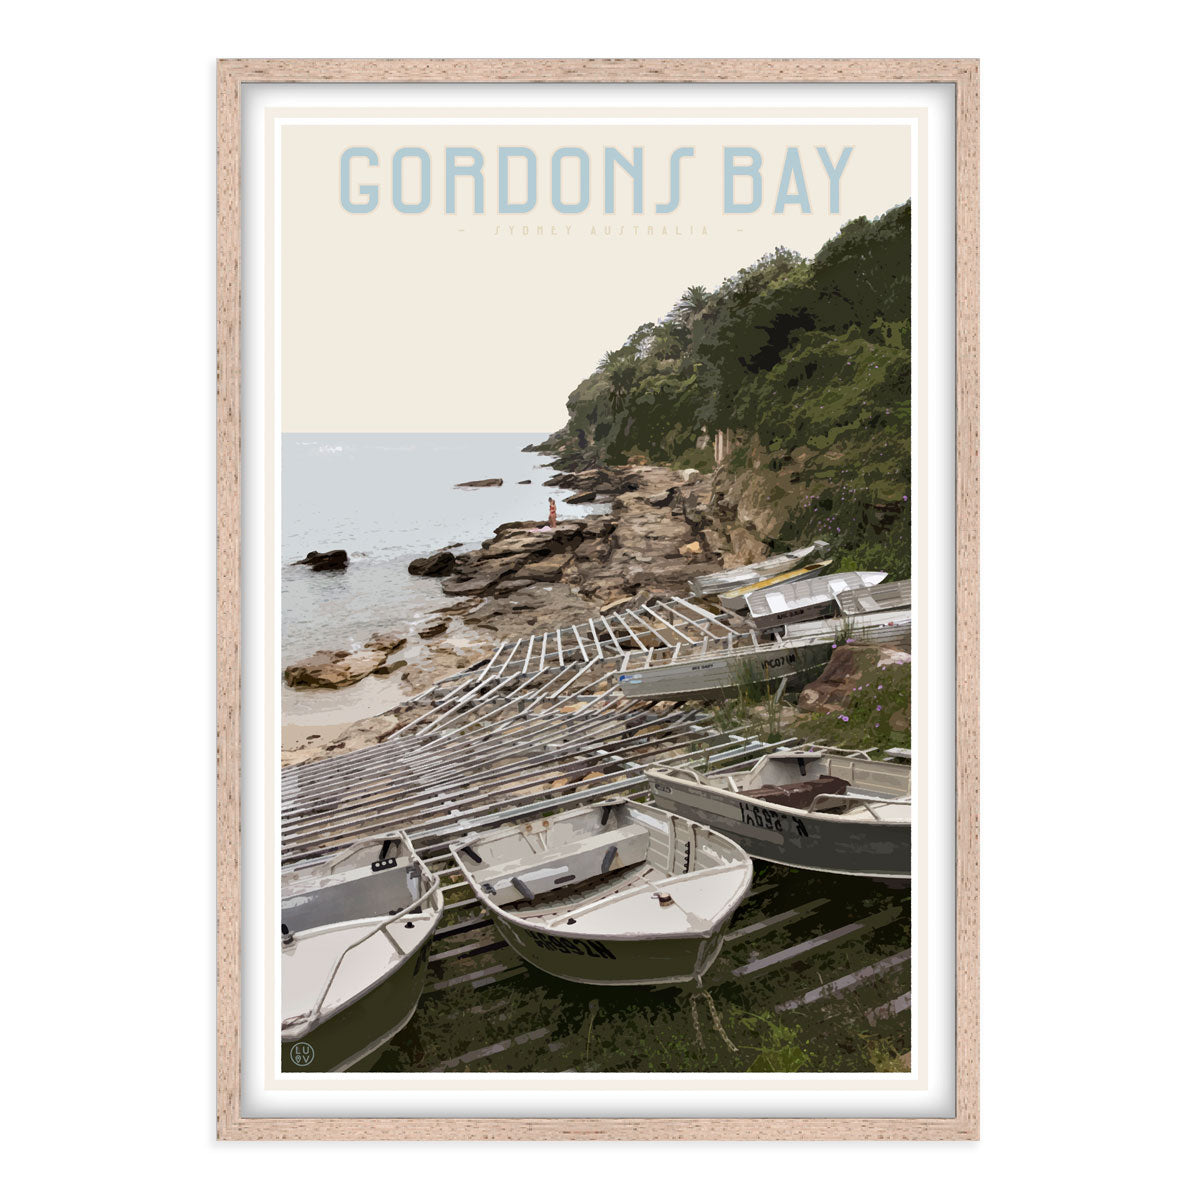 Gordons Bay vintage travel style oak framed print by Places We Luv